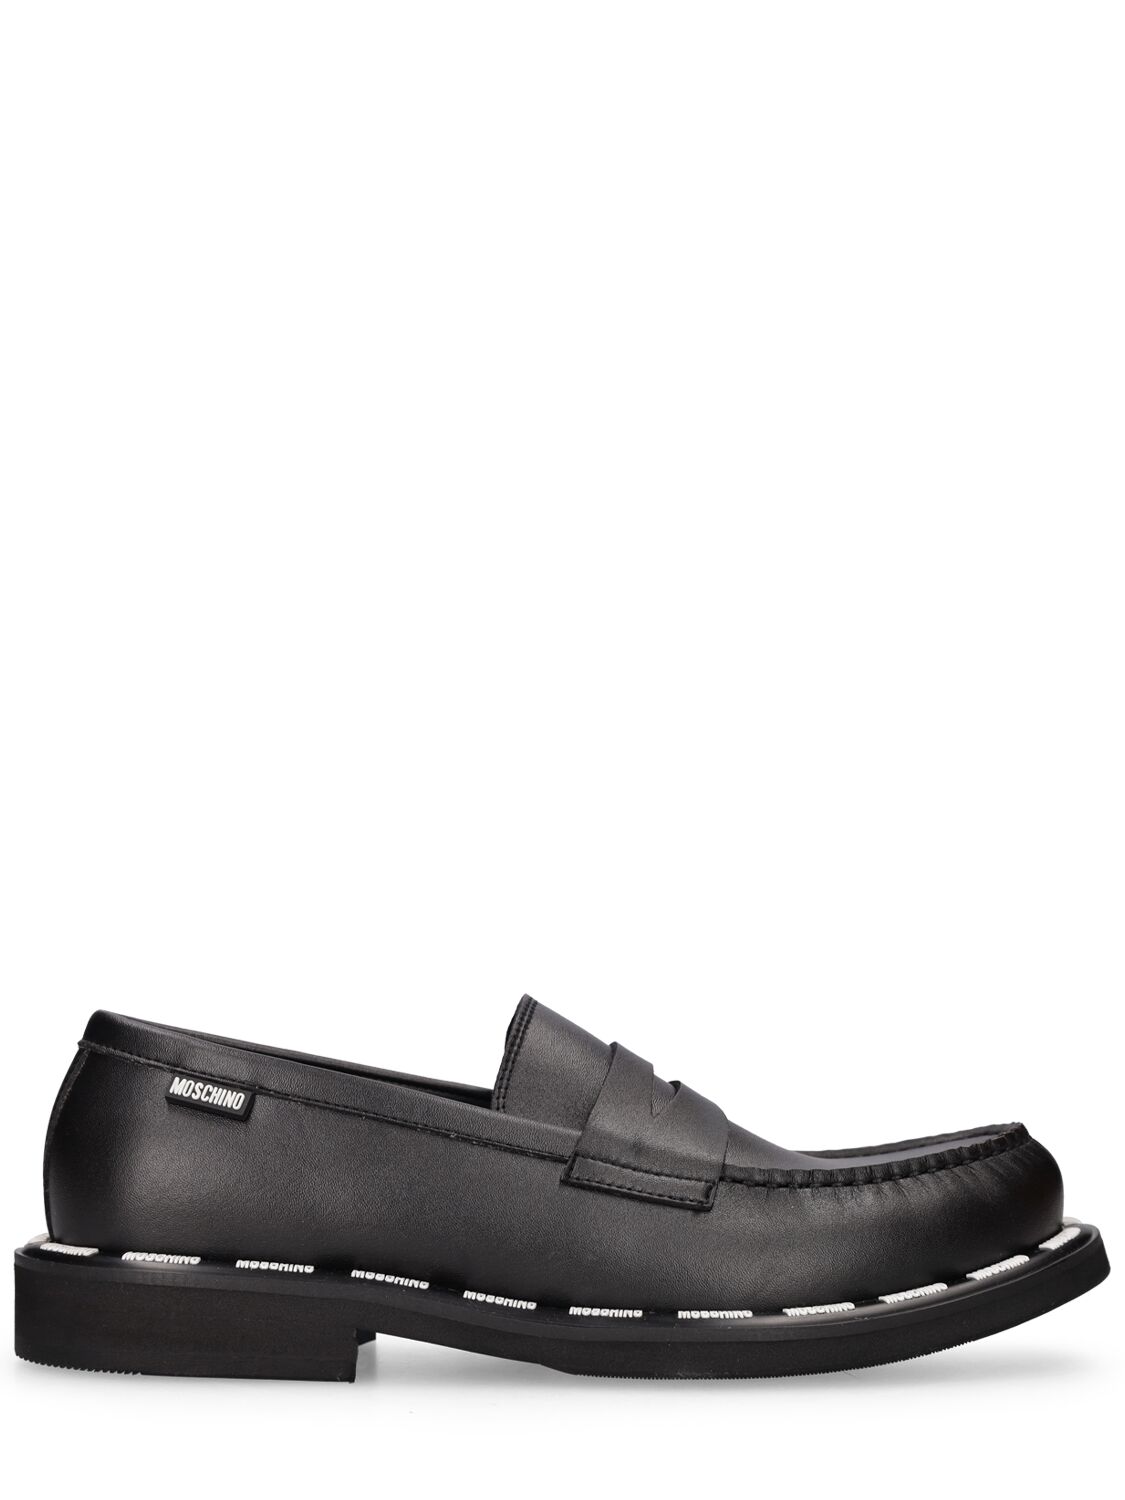 Moschino Logo Faux Leather Loafers In Black